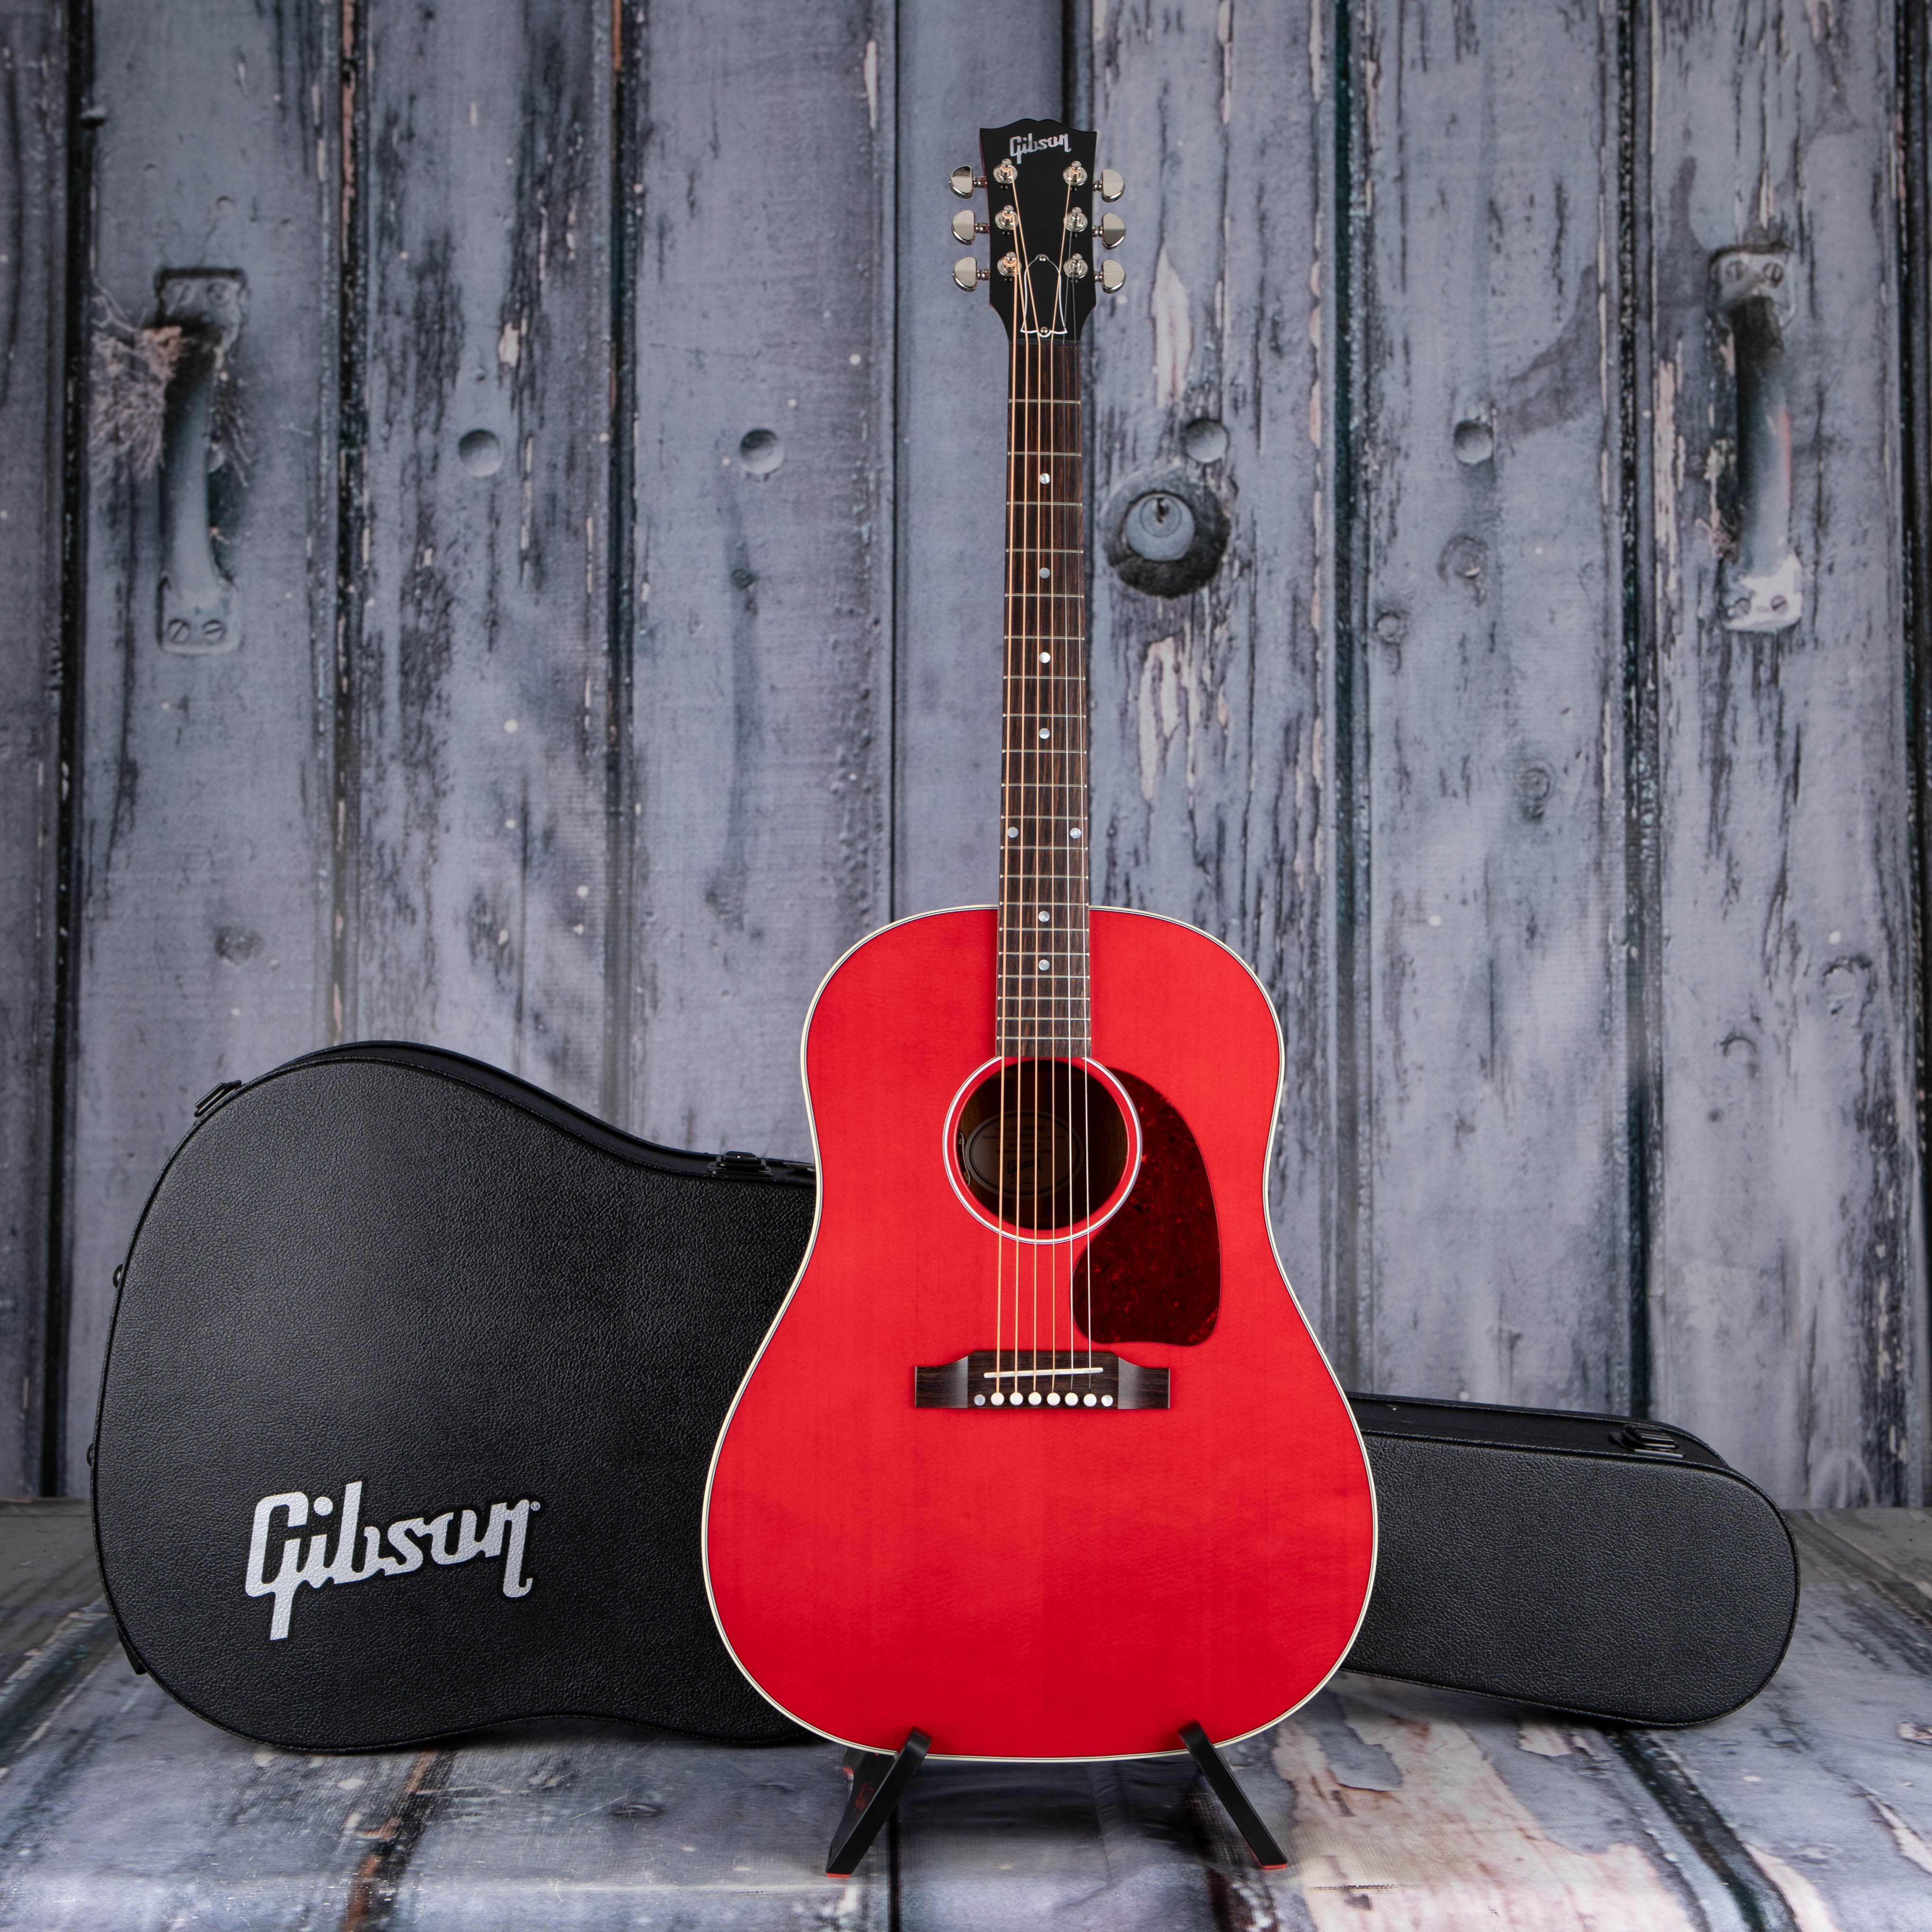 Gibson Montana J-45 Standard Acoustic/Electric Guitar, Cherry, case